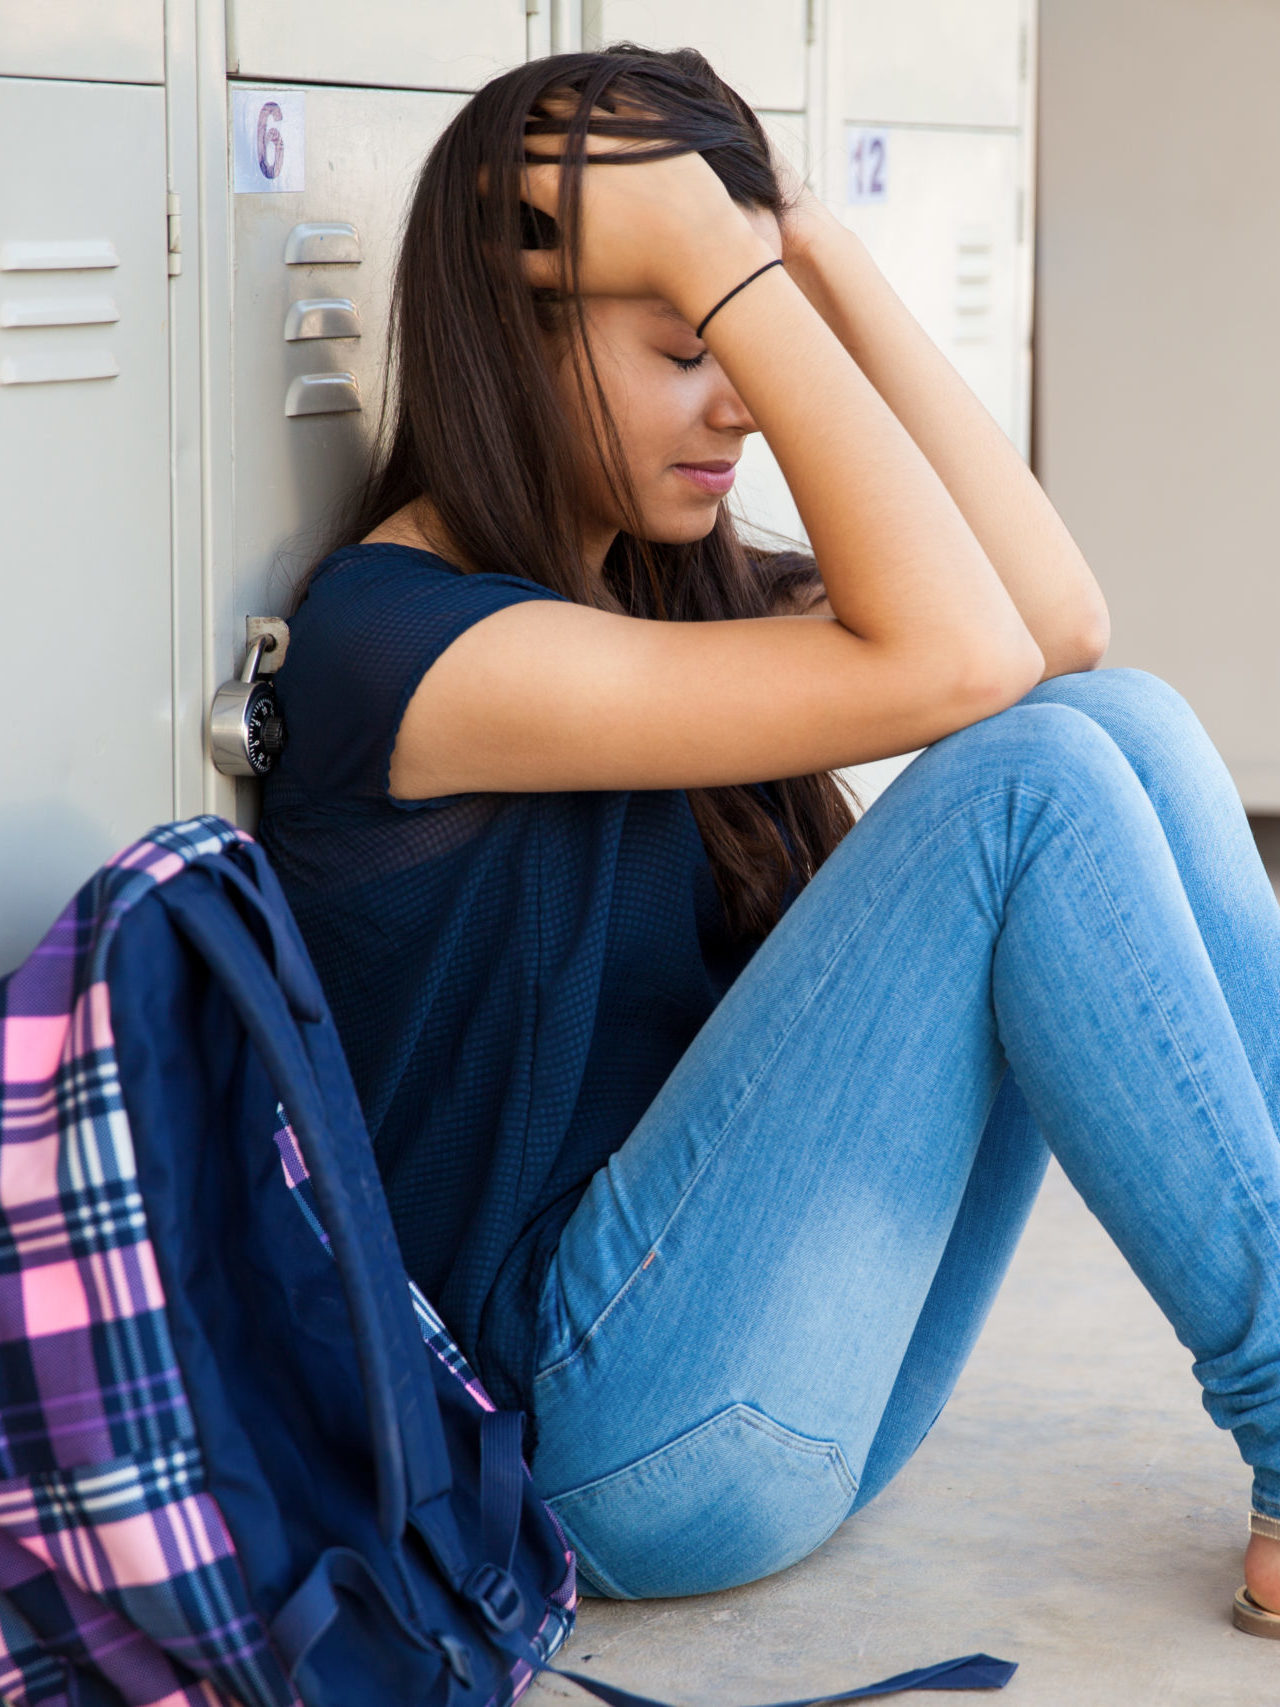 teen girl crying sitting on floor by lockers at school